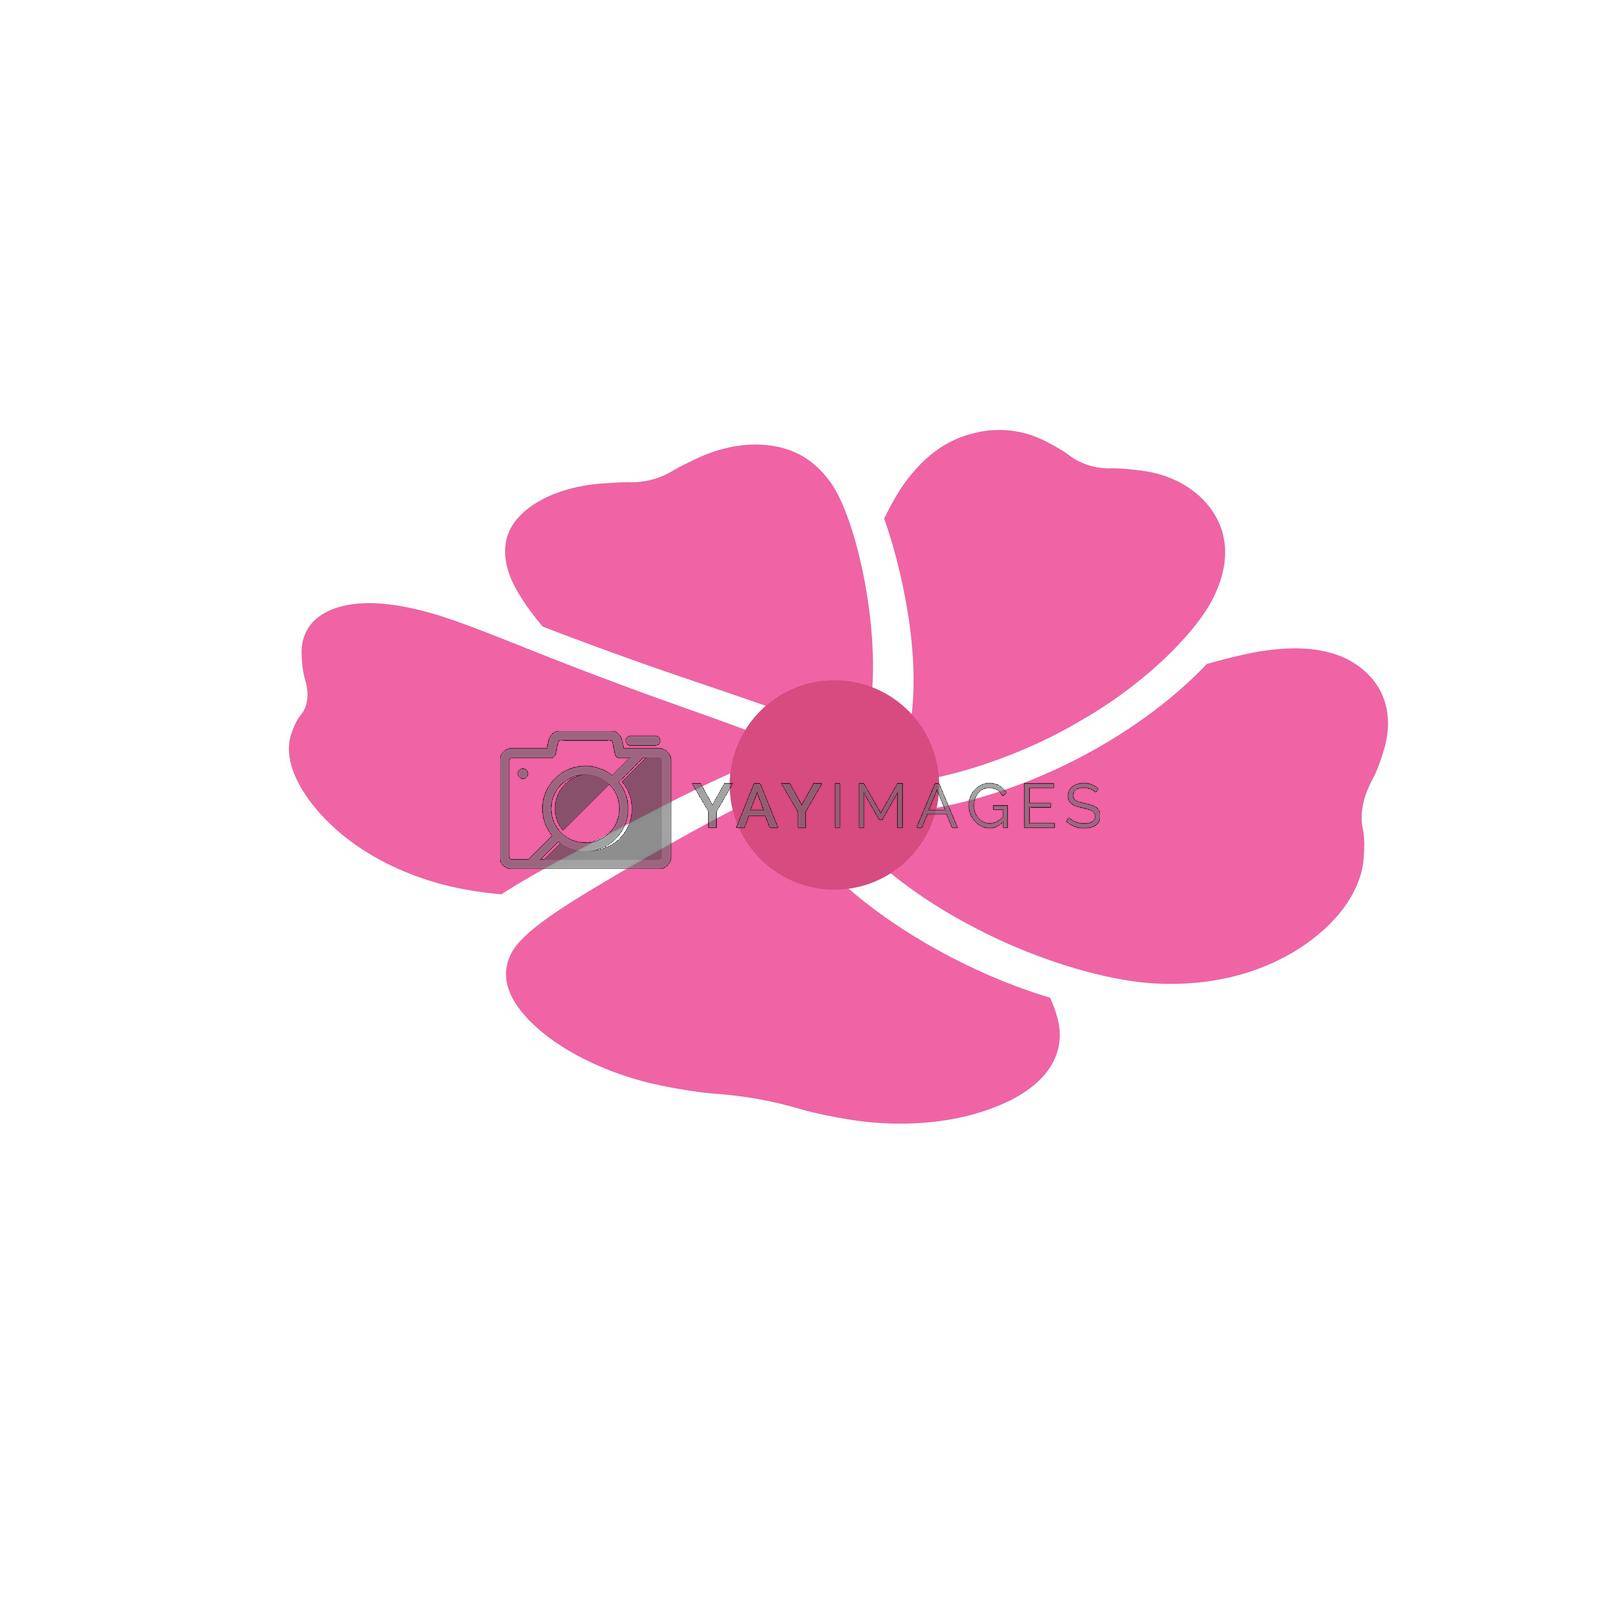 Royalty free image of Plumeria Logo Template vector symbol by Redgraphic